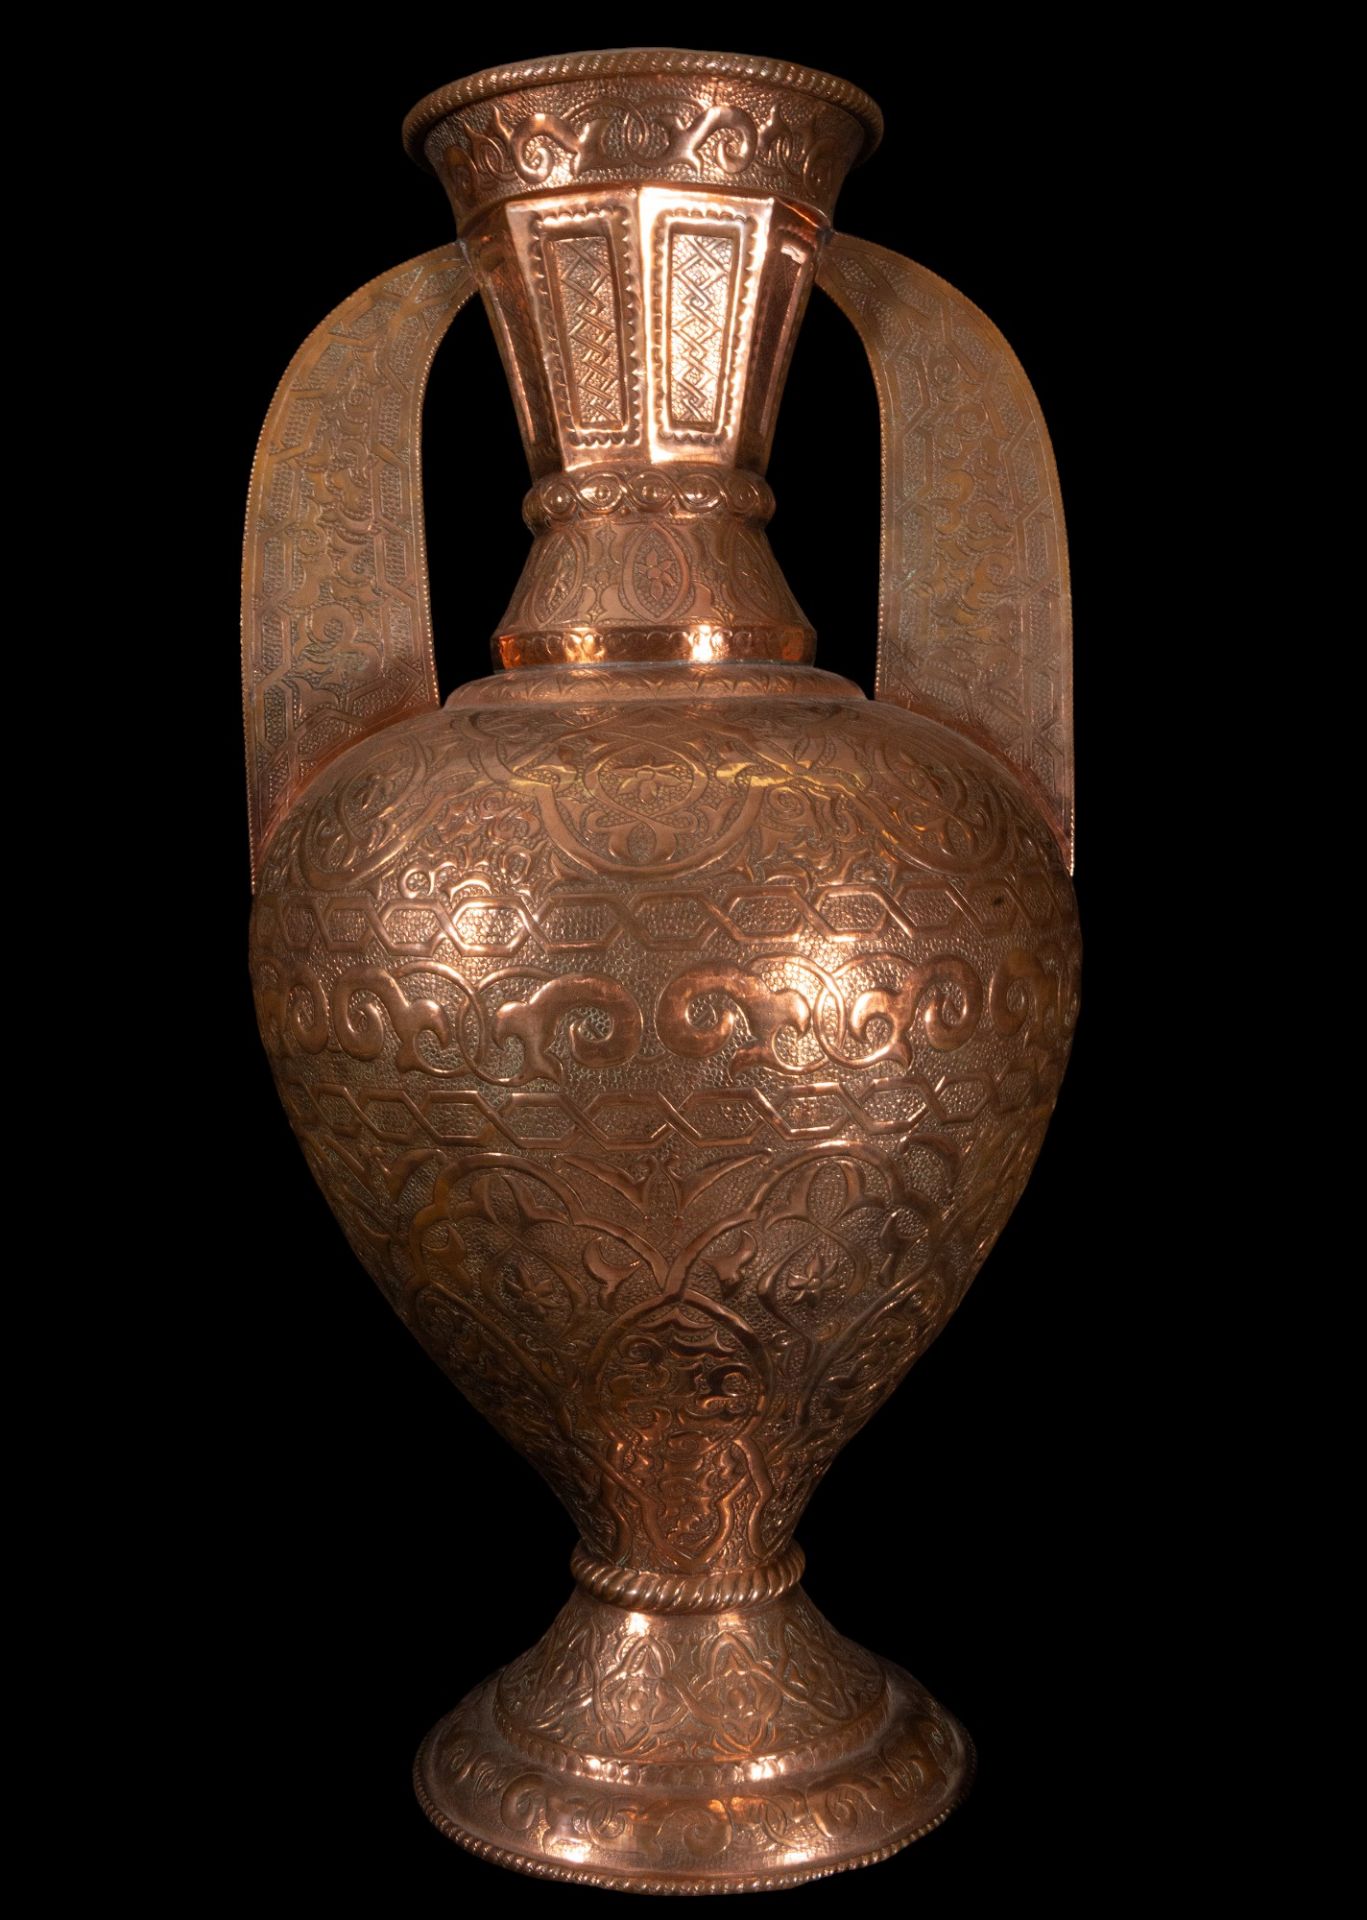 Pair of Large Embossed Copper Vases in the "Alhambra" style, Andalusian Granada work from the 19th c - Bild 3 aus 10